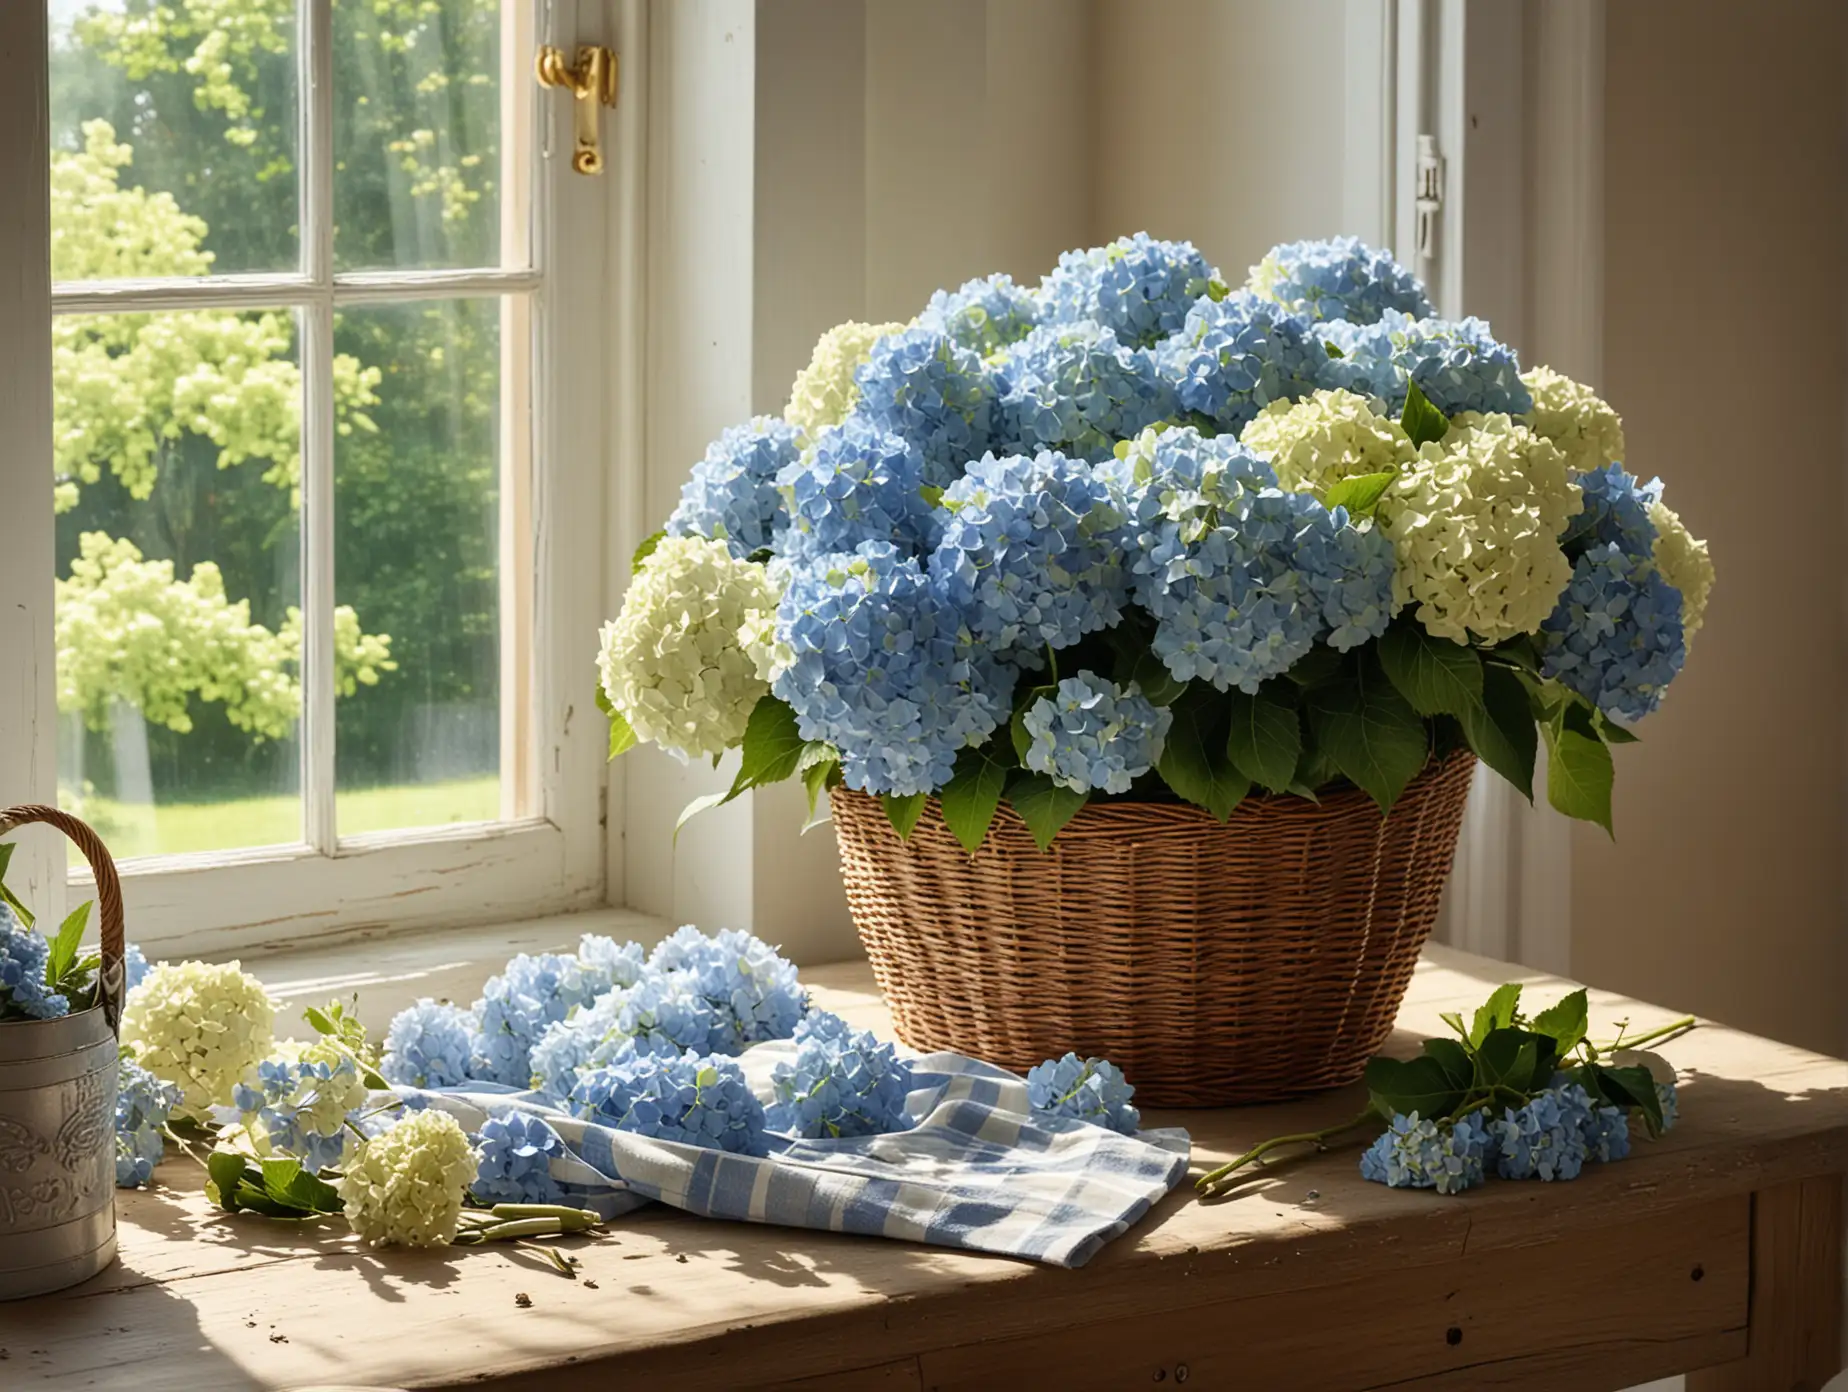 in style of van gogh still life create an image of cut hydrangeas lying horizontally across a basket showing stalks and heads of flowers on a country table next a wall and large window window with morning sunlight coming in with several cutting accessories and other accessories., with some hydrangeas  loose on the table next to the cutting shears